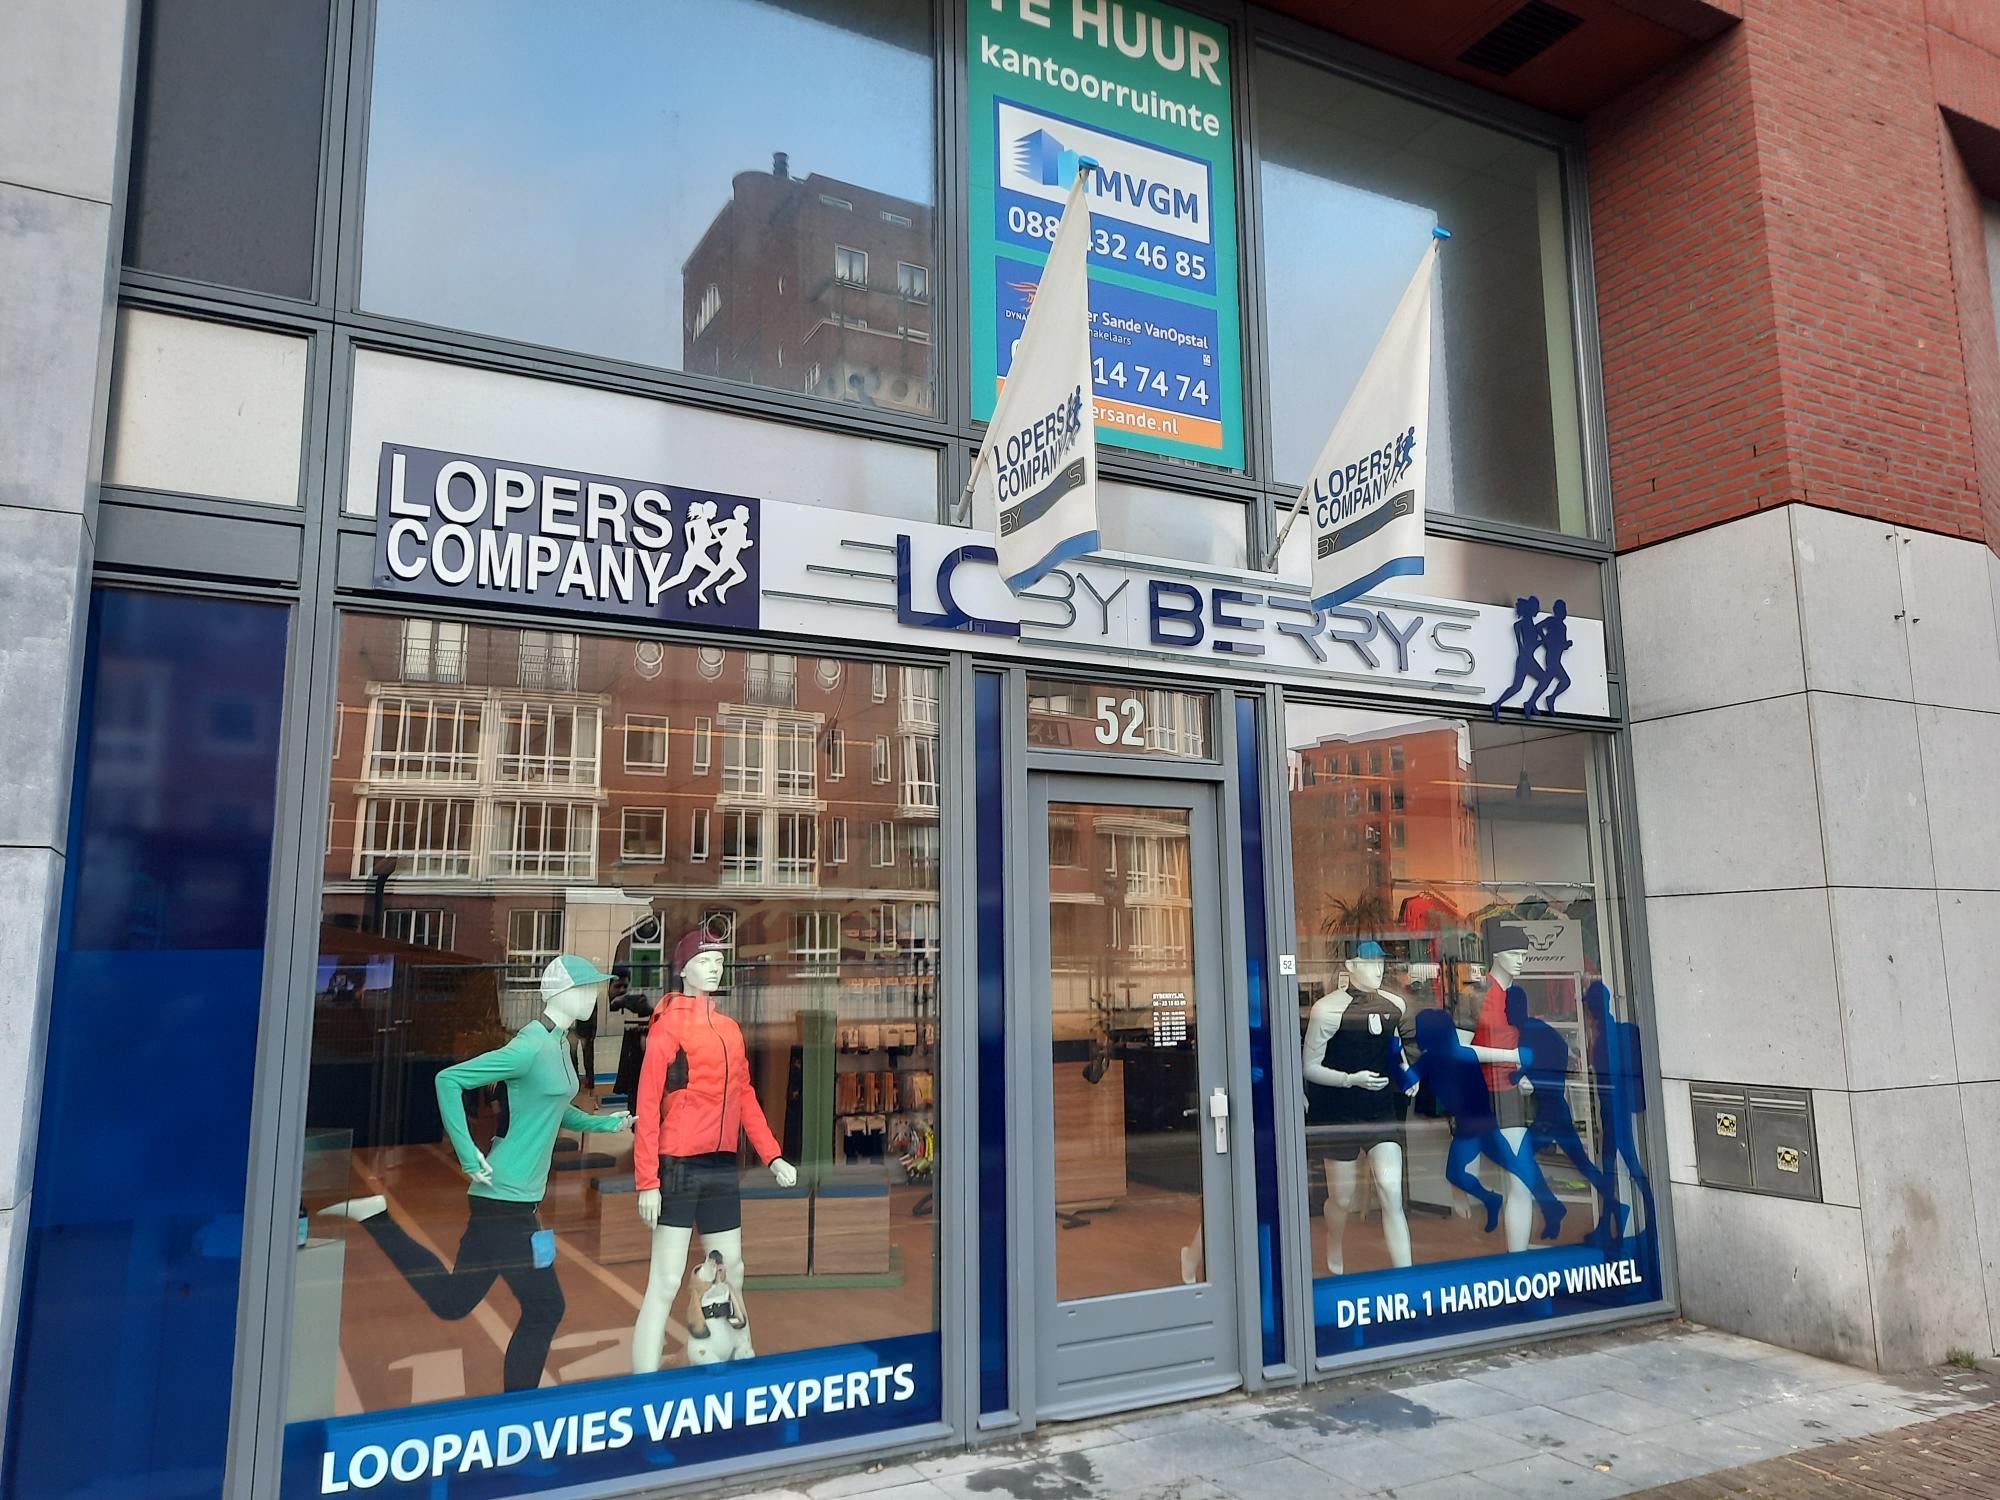 Zinloos tekst maagd Lopers Company By Berry's | Breda